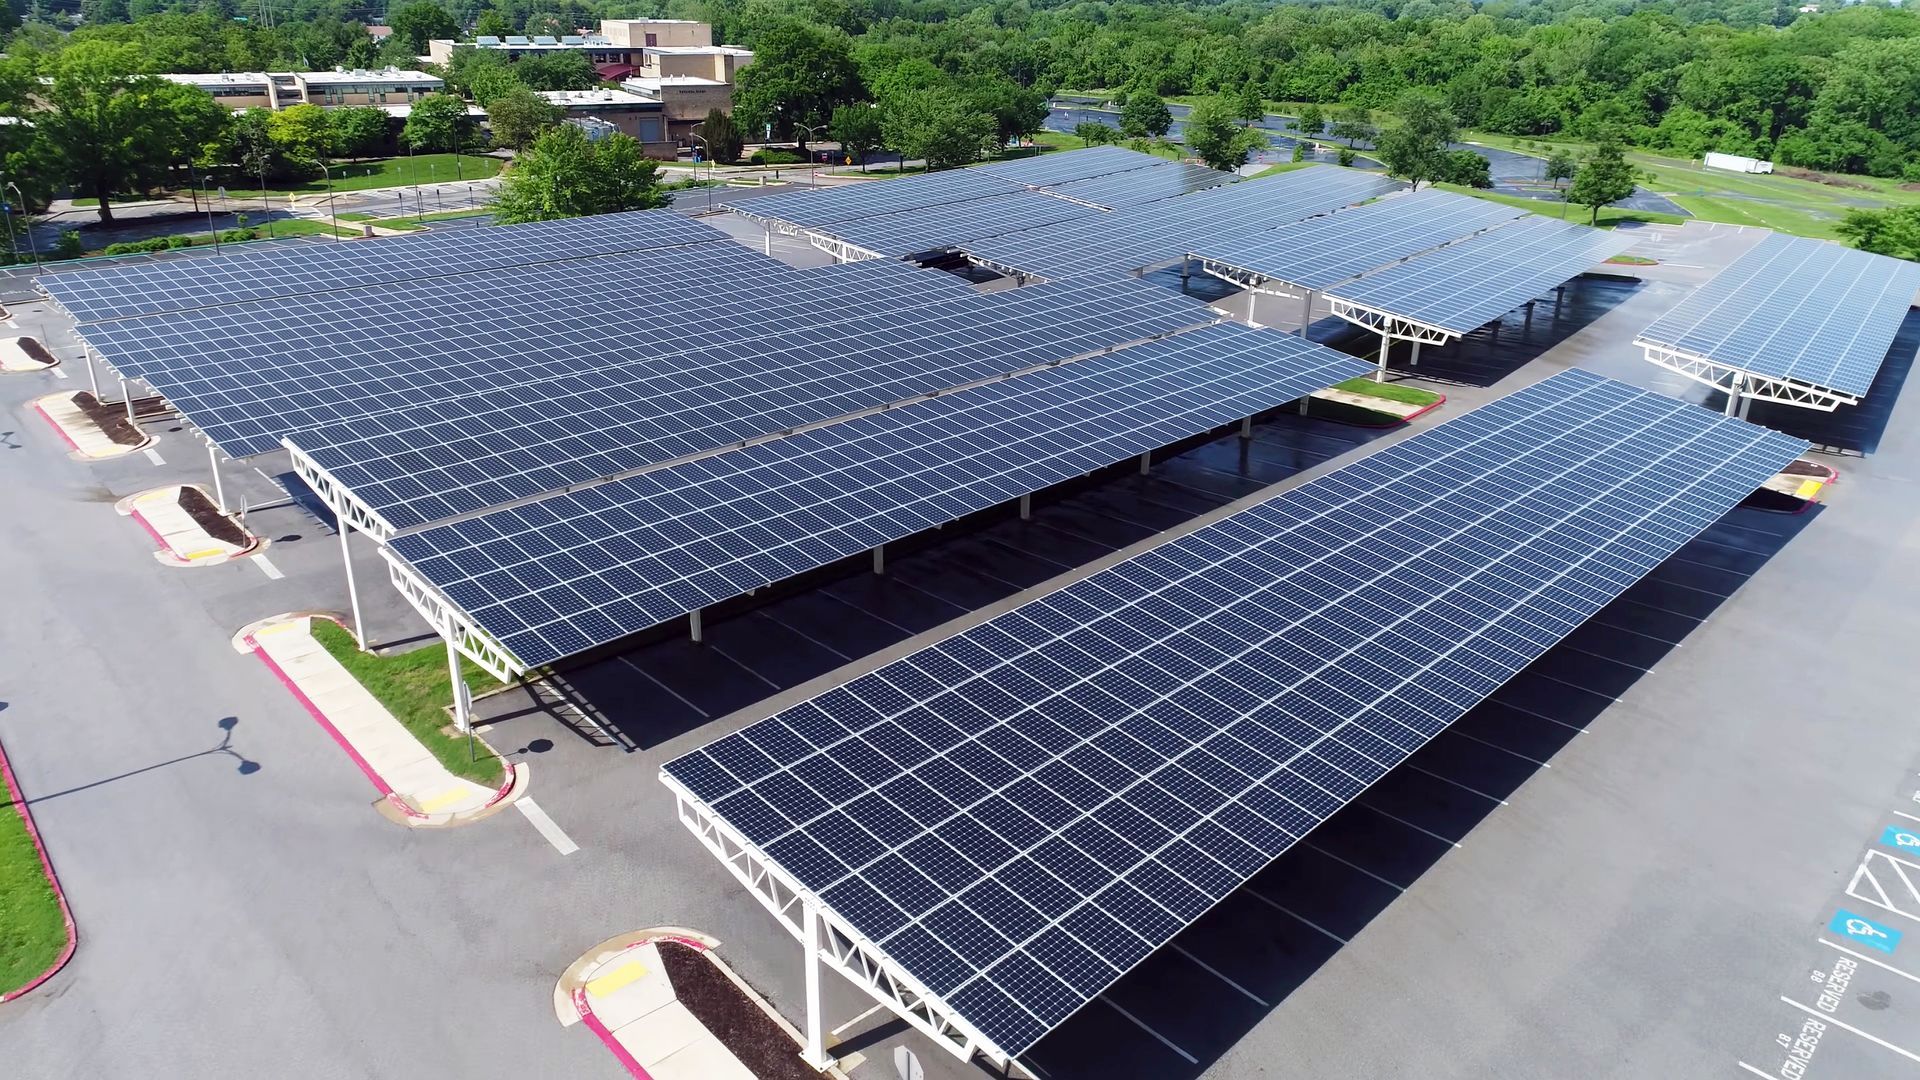 an aerial view of a parking lot with solar panels on the roof